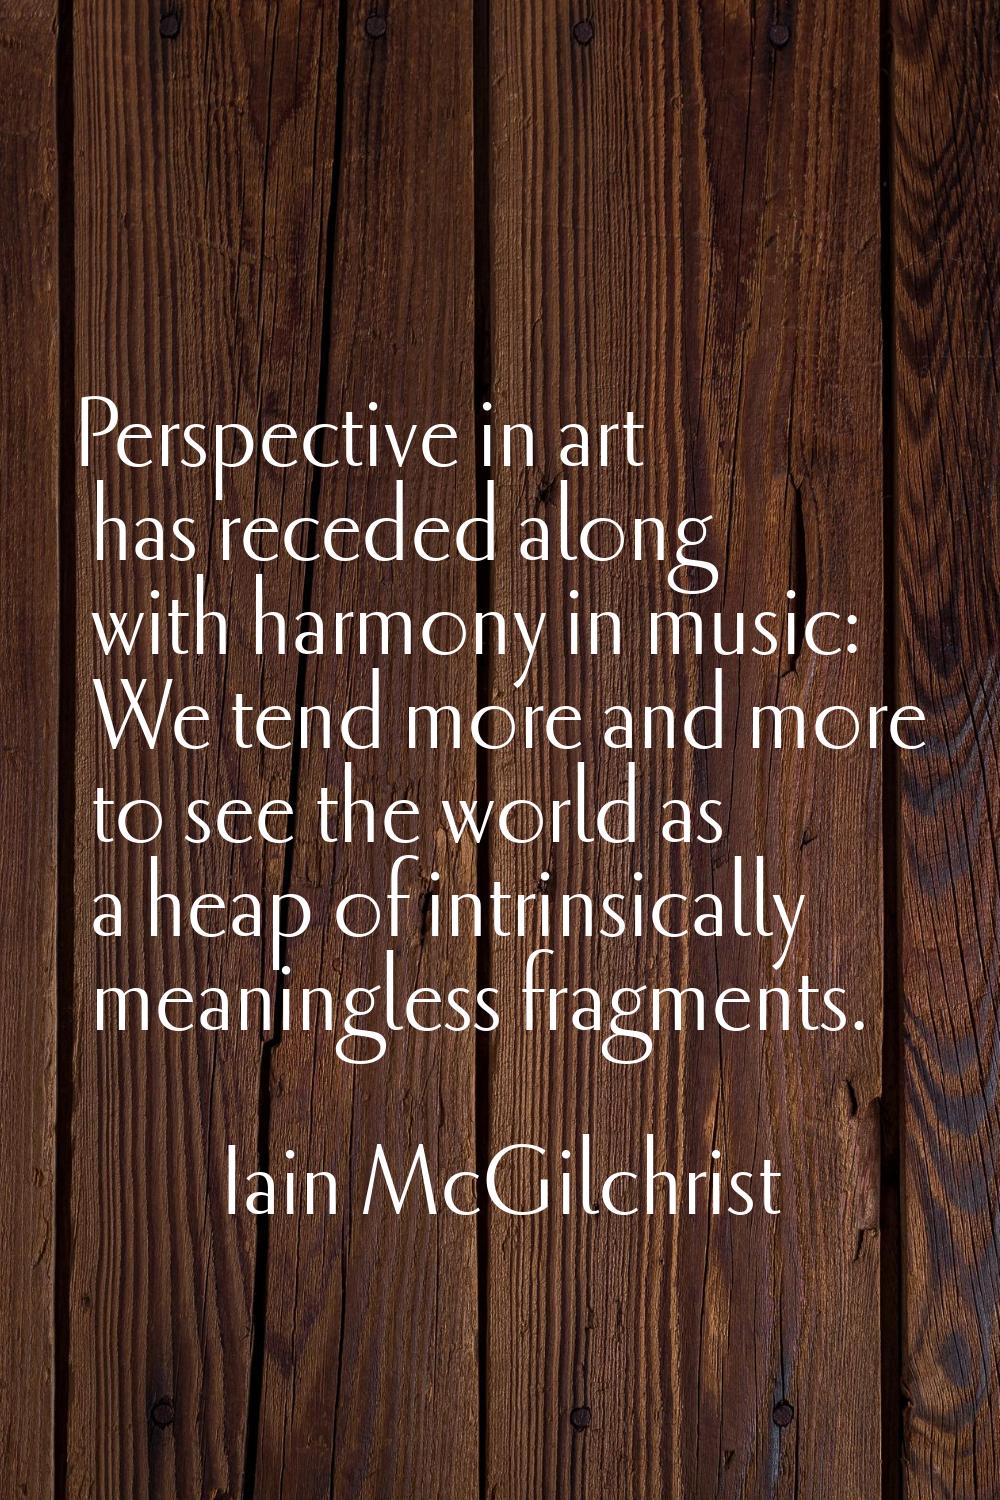 Perspective in art has receded along with harmony in music: We tend more and more to see the world 